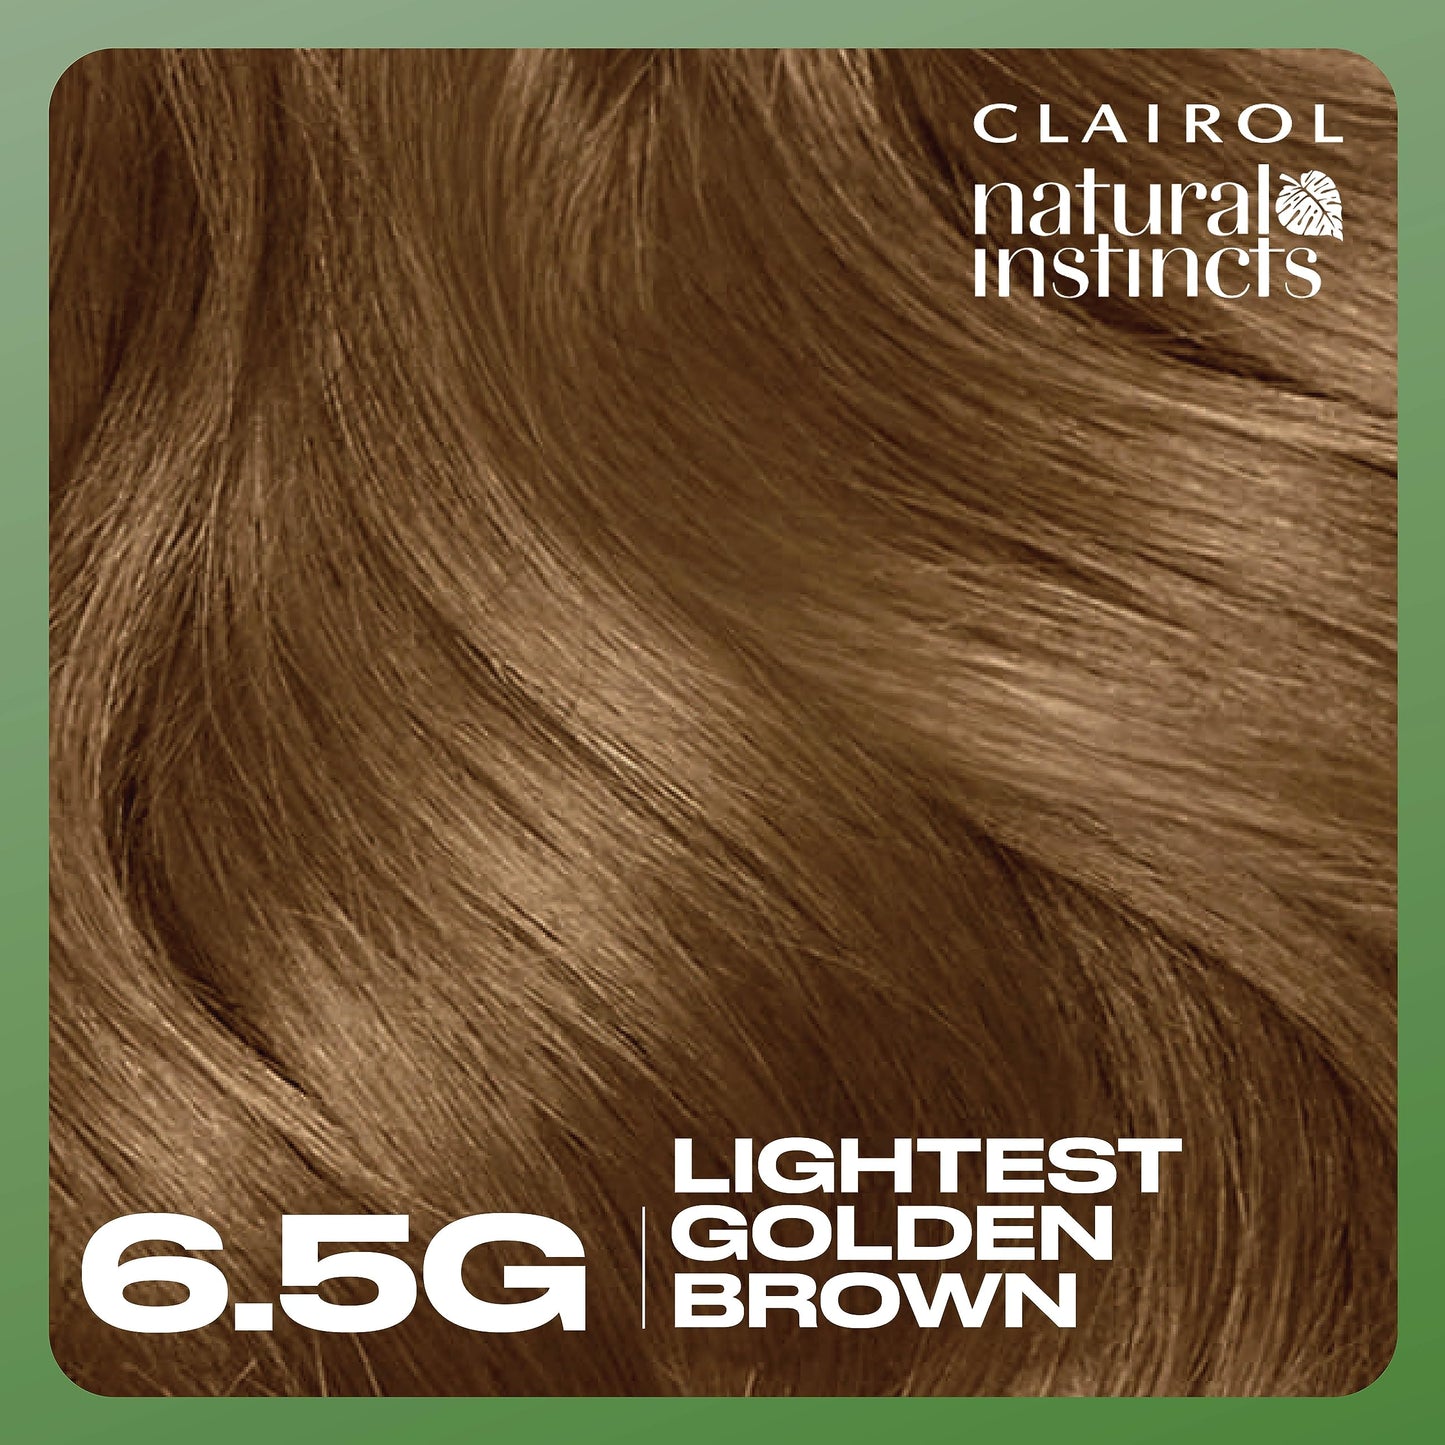 Clairol Natural Instincts Demi-Permanent Hair Dye, 6.5G Lightest Golden Brown Hair Color, Pack of 1